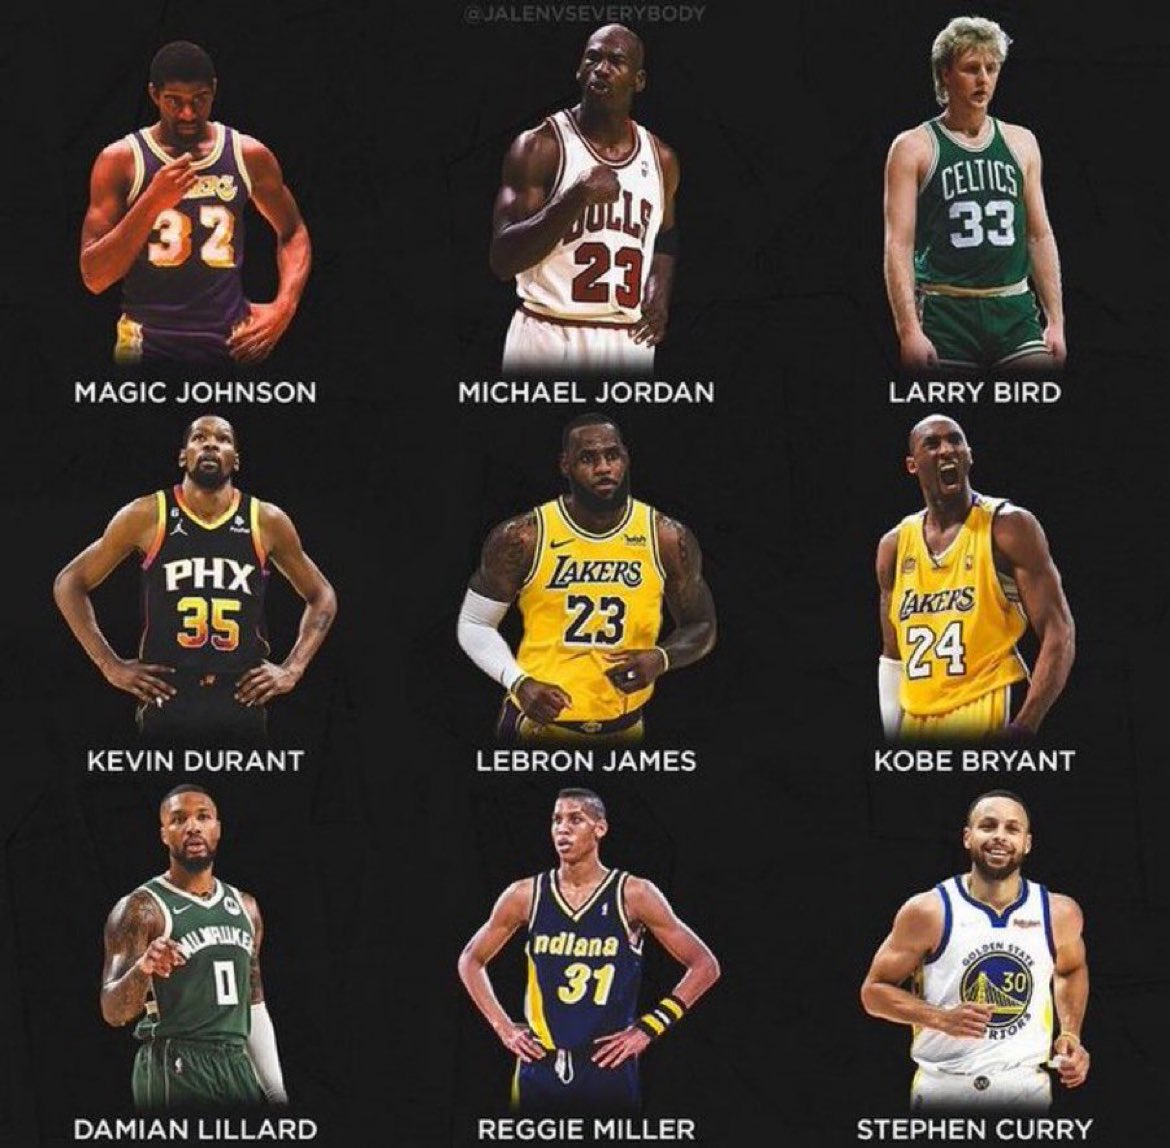 Who is the worst NBA goat in this picture?